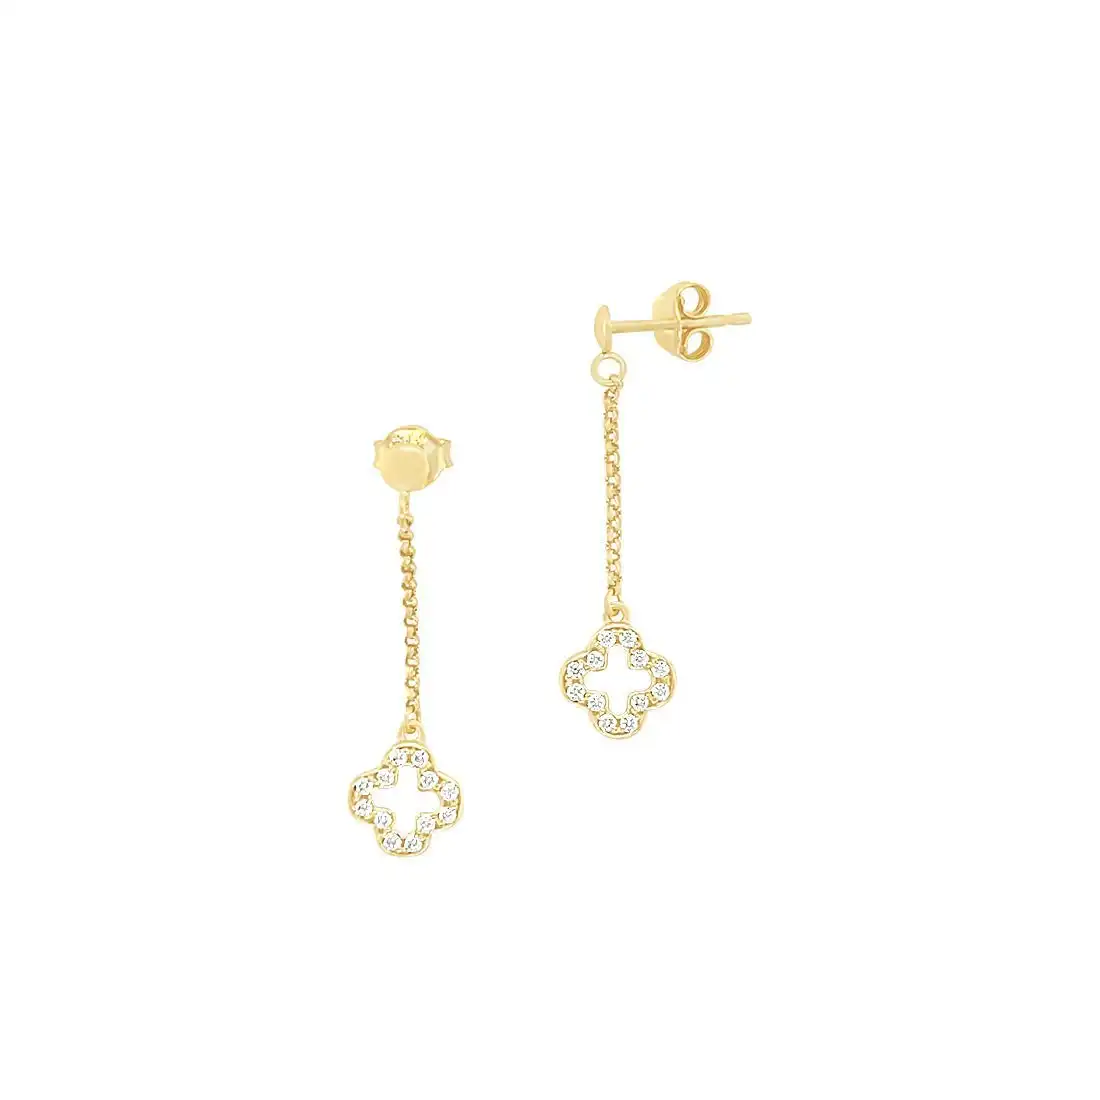 9ct Yellow Gold Silver Infused 4 Leaf Clover Drop Earrings